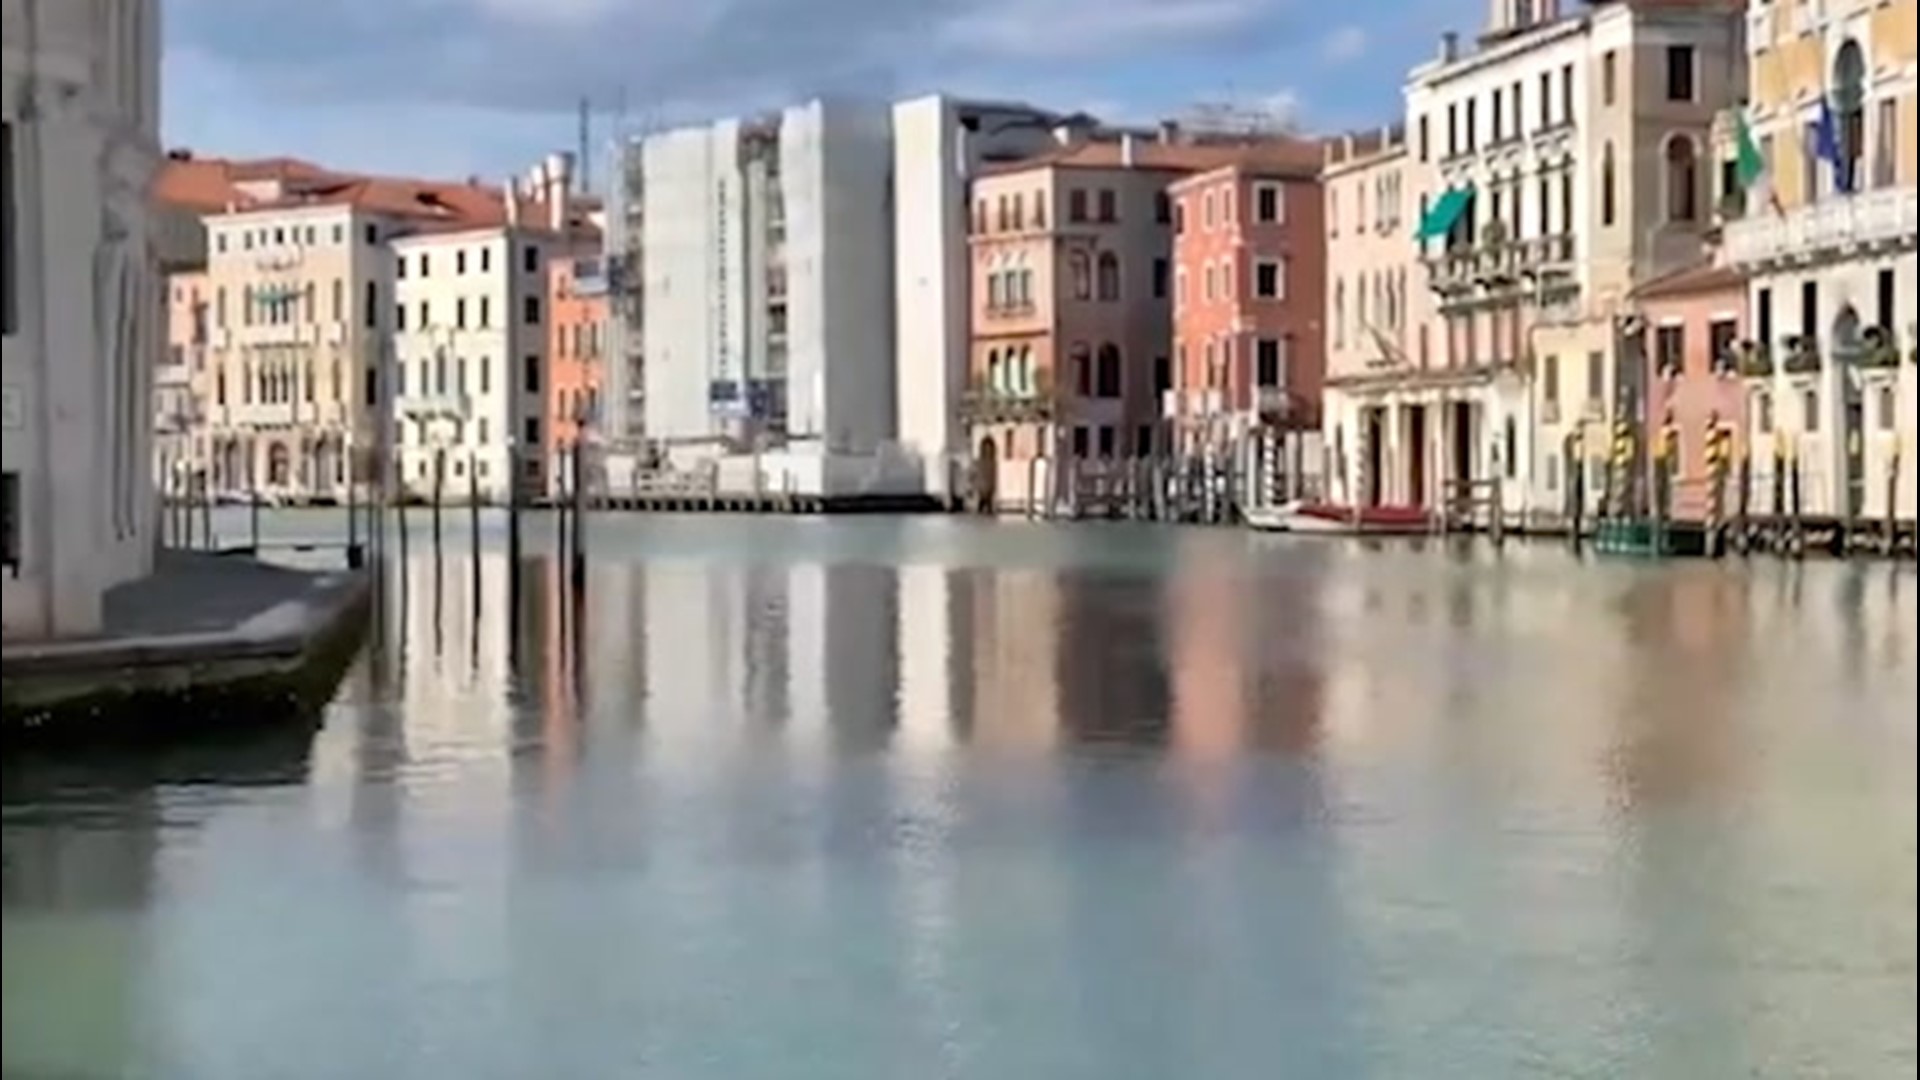 On April 1, the famous canals of Venice, Italy, were understandably empty as the coronavirus lockdown continued.